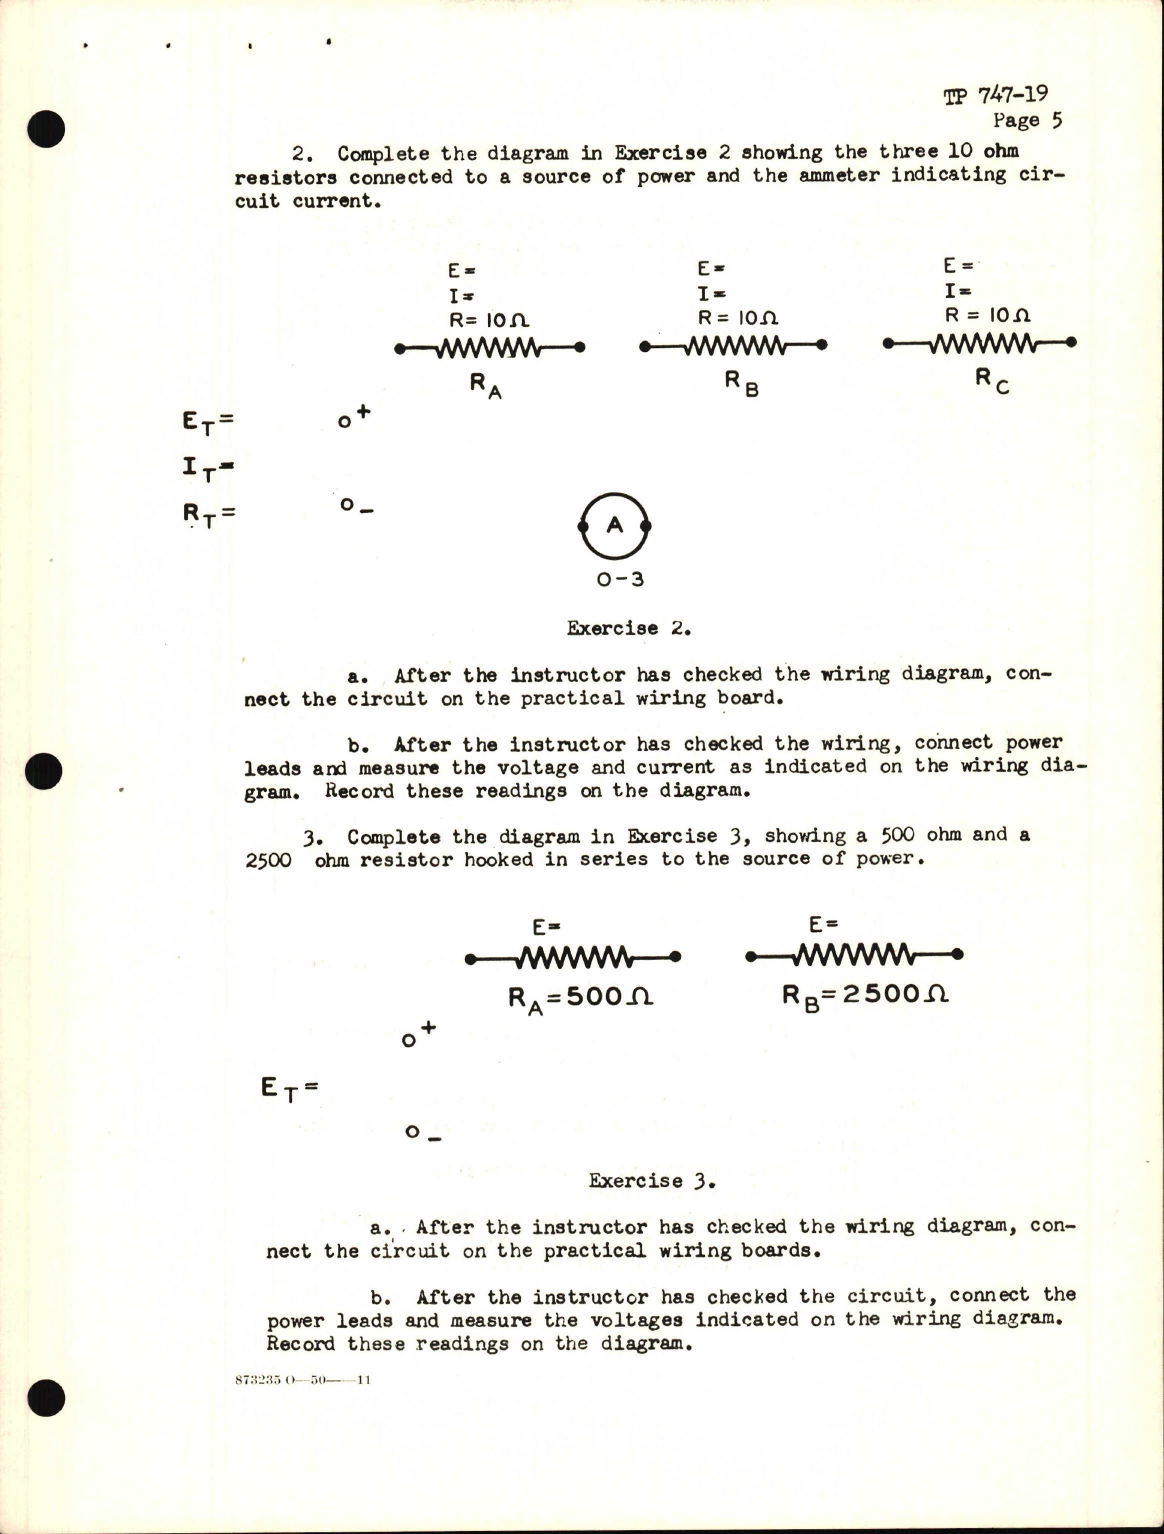 Sample page 5 from AirCorps Library document: Training Project, Series, Parallel, and Series-Parallel Circuits